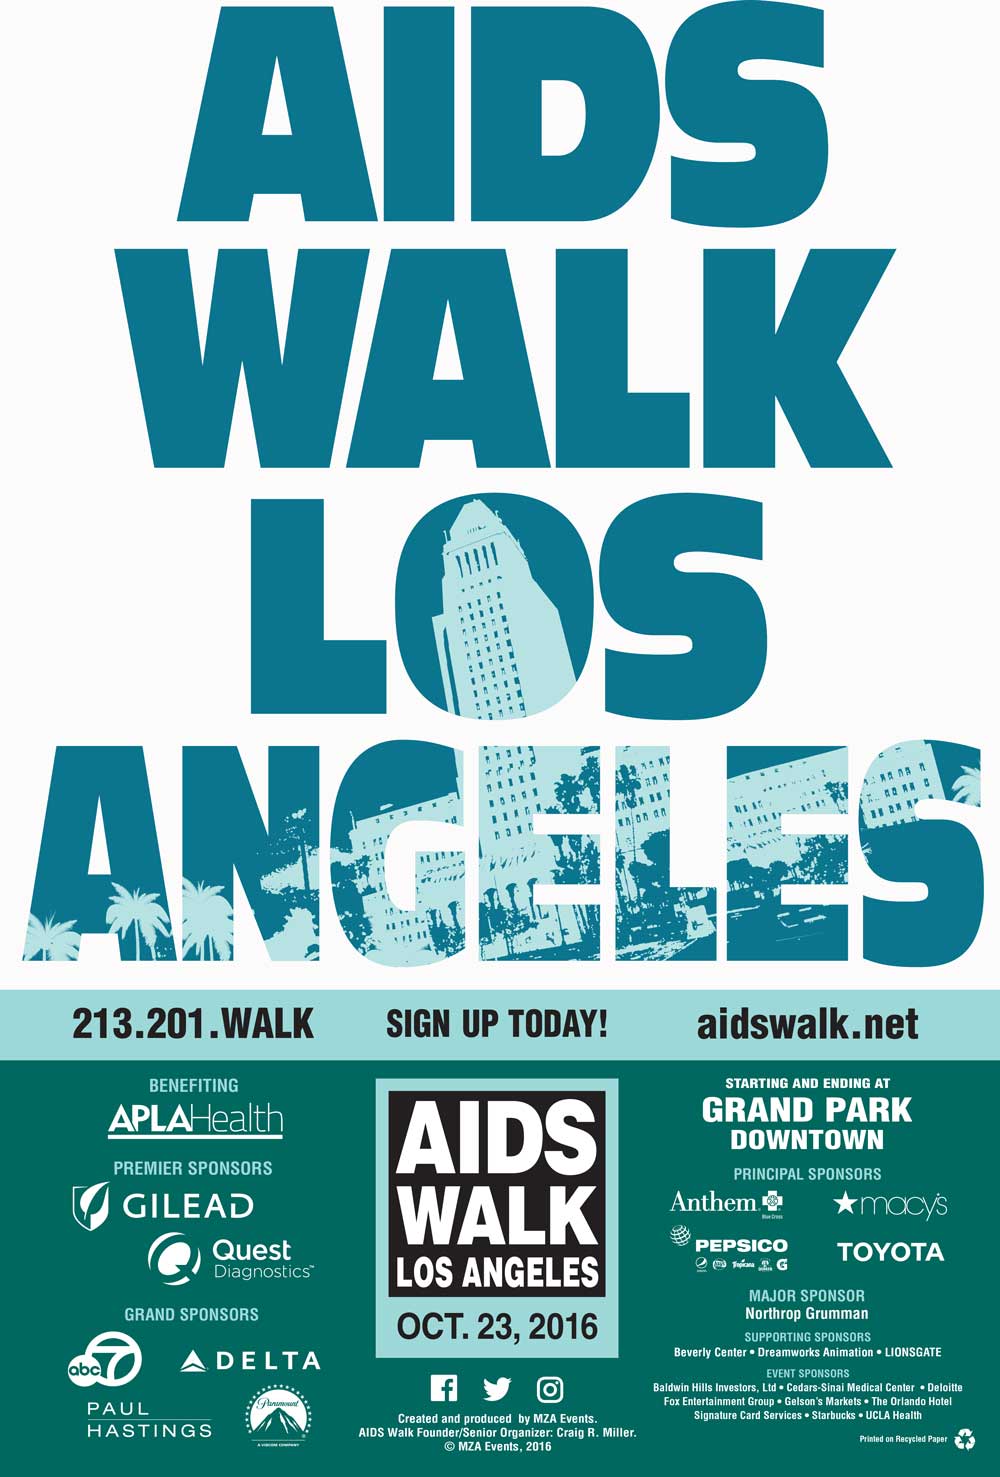 AIDS Walk Los Angeles with KLOS in Los Angeles at Grand Park